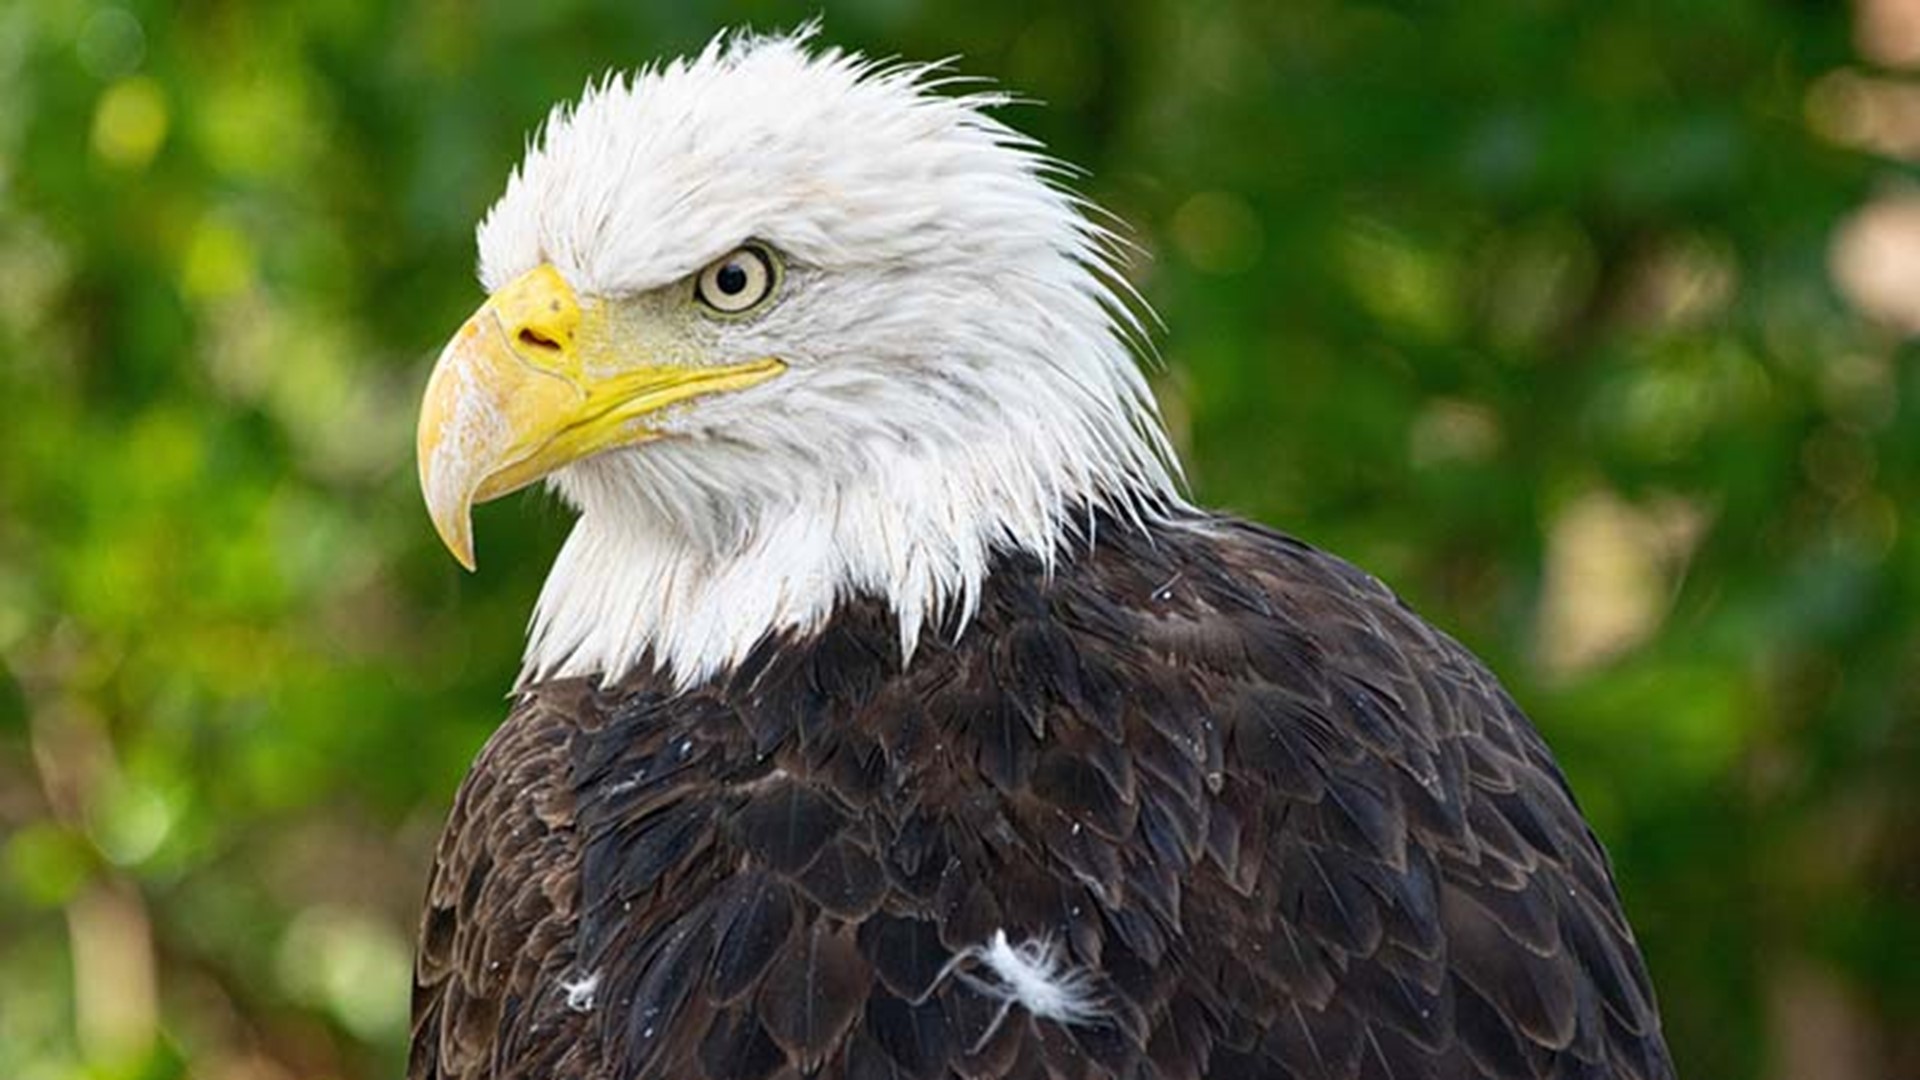 The eagle named Mae had a critically injured wing that left her unable to fly so she couldn't be released back into the wild.